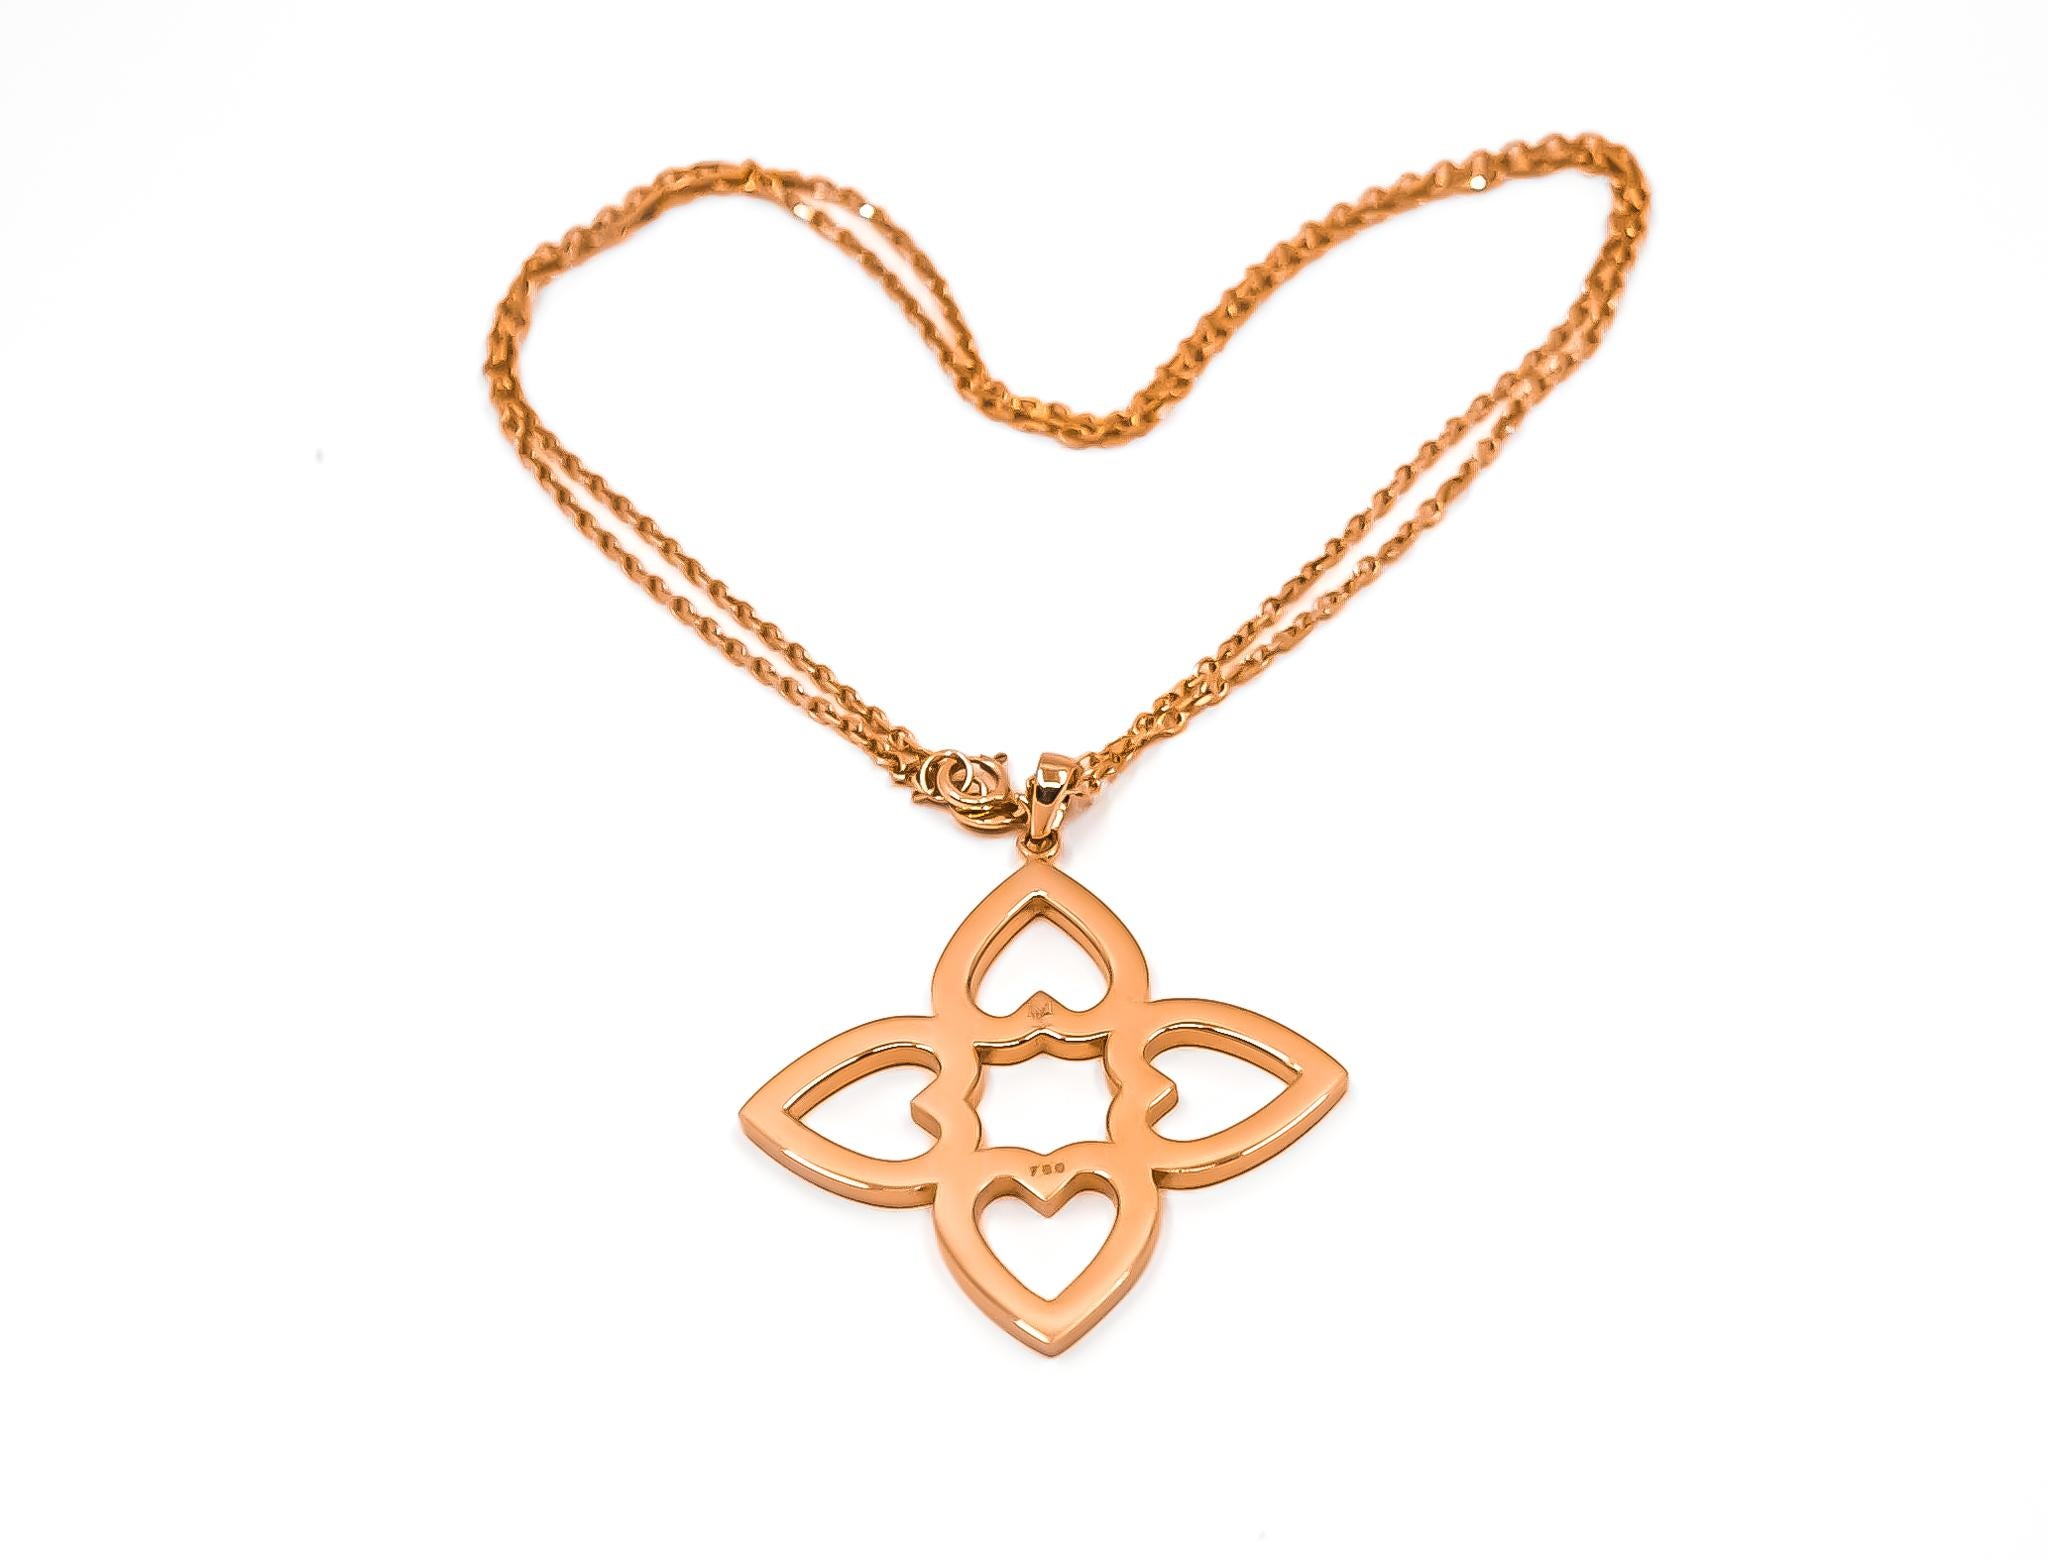 Connected Hearts Pendant Necklace in 18kt Rose Gold In New Condition For Sale In Dubai, AE